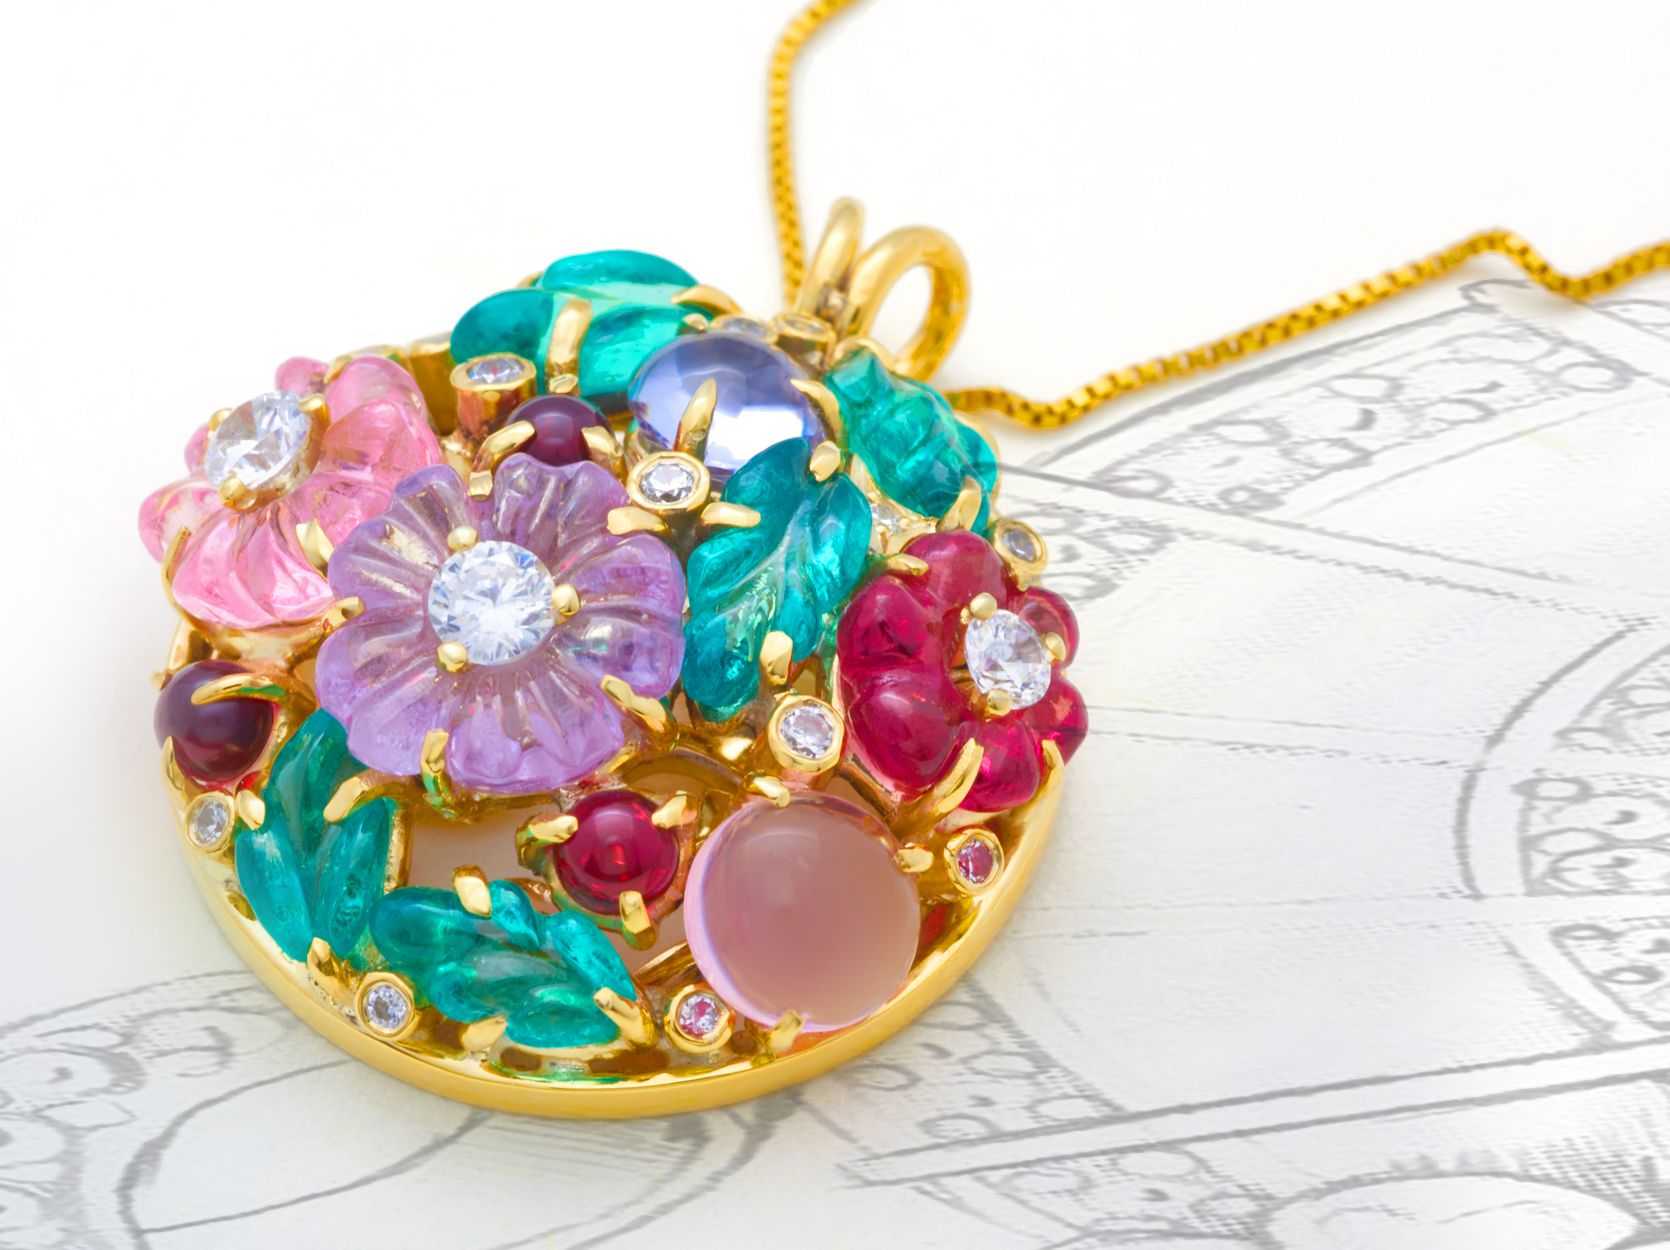 Lighten up your mood with this colorful “Summer Bouquet” pendant.